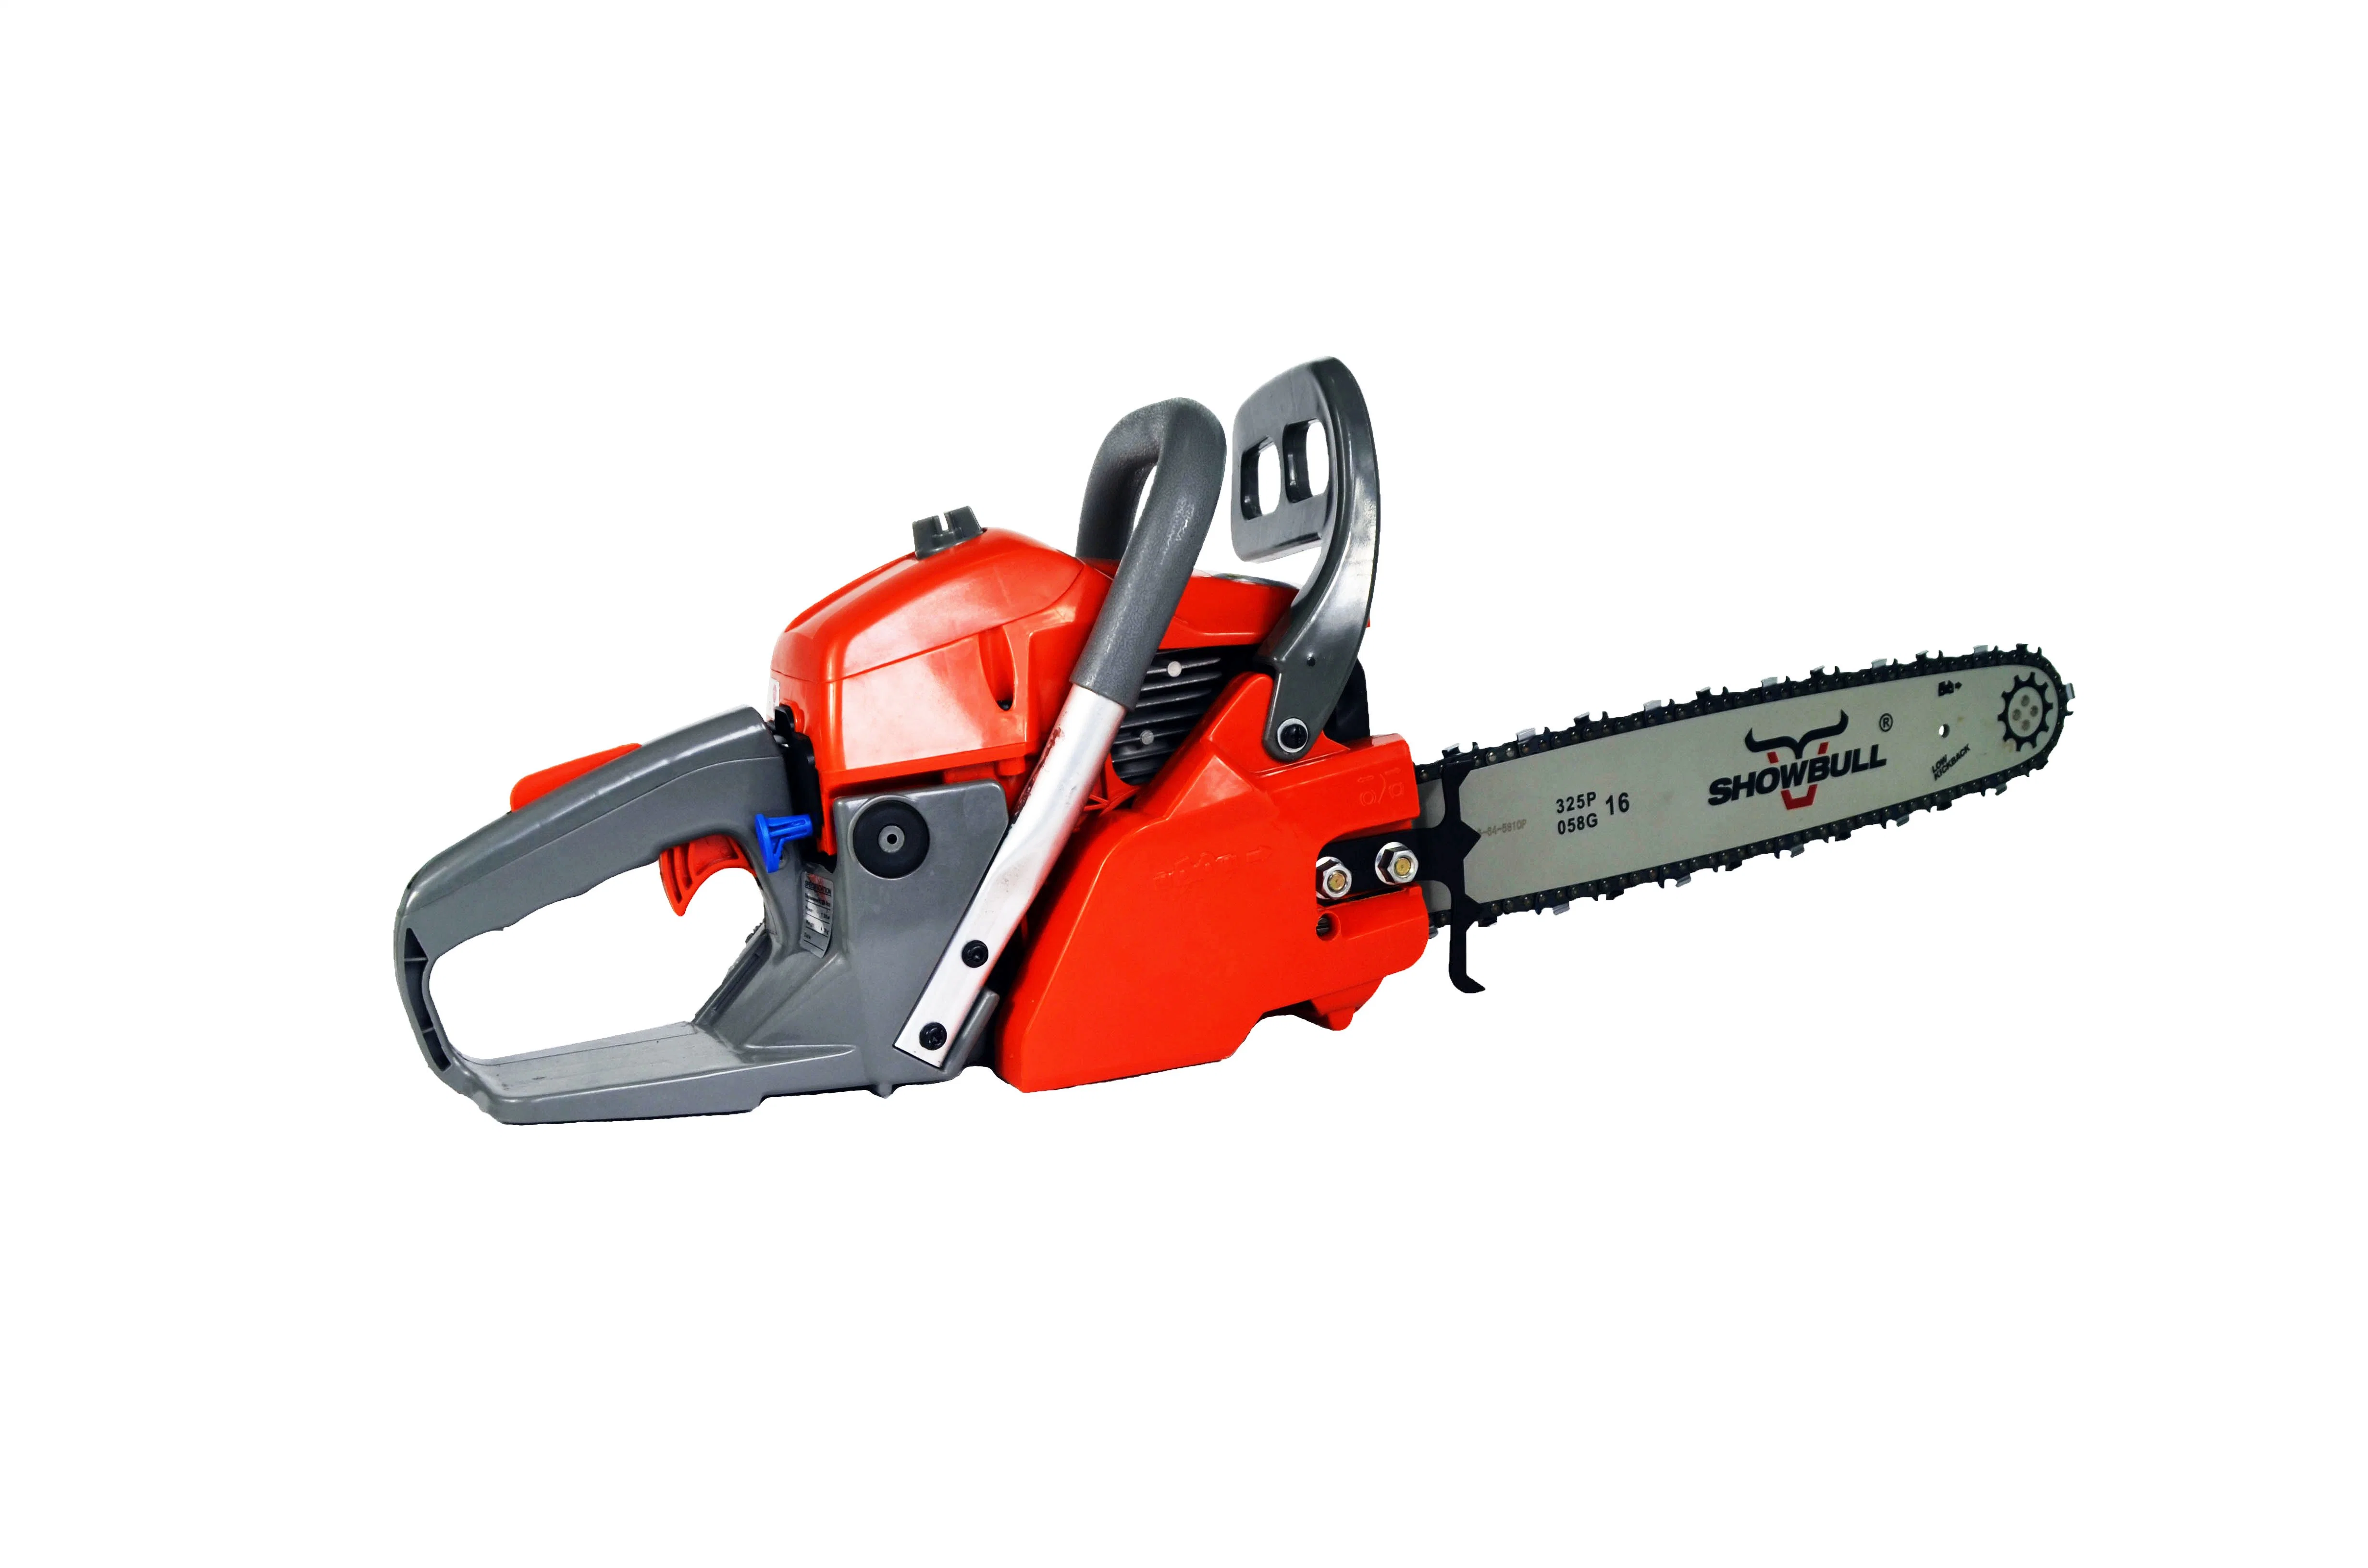 Factory Gardenline Chainsaw Garden Tools for Wood Cutting